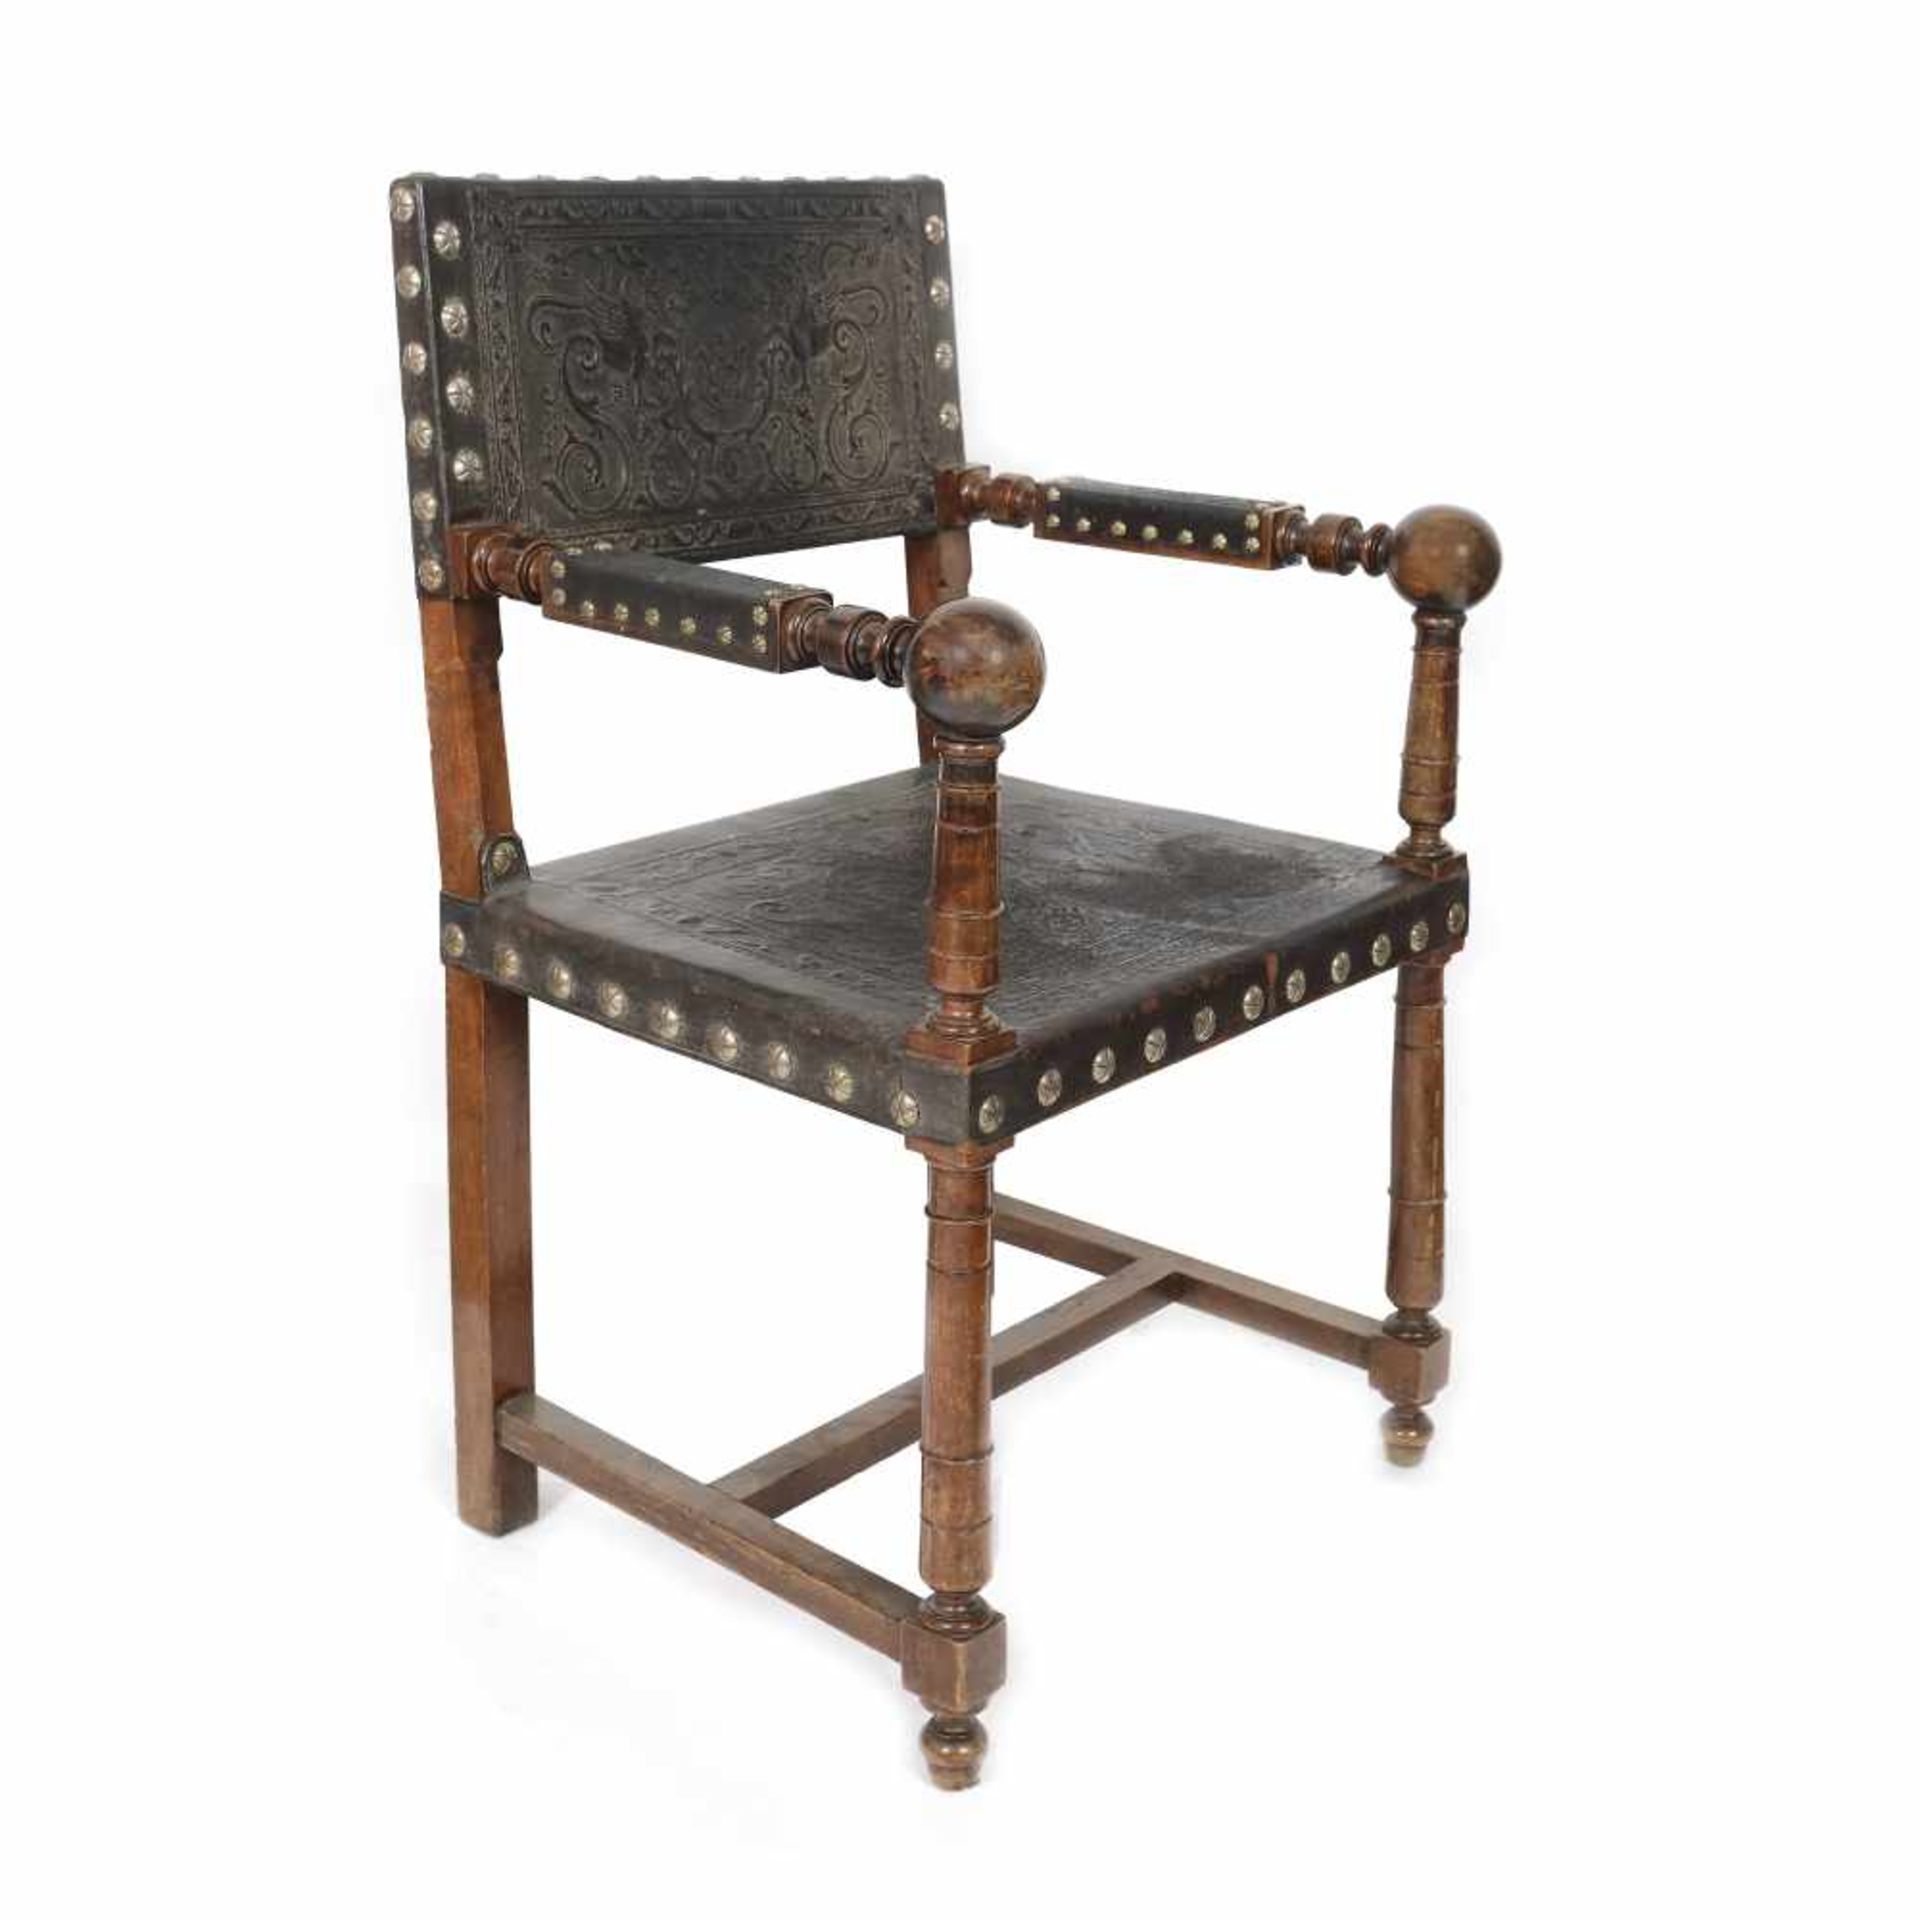 Neo-Renaissance inspired chair, with embossed cordoba leather, late 19th century, belonged to the pa - Bild 2 aus 2